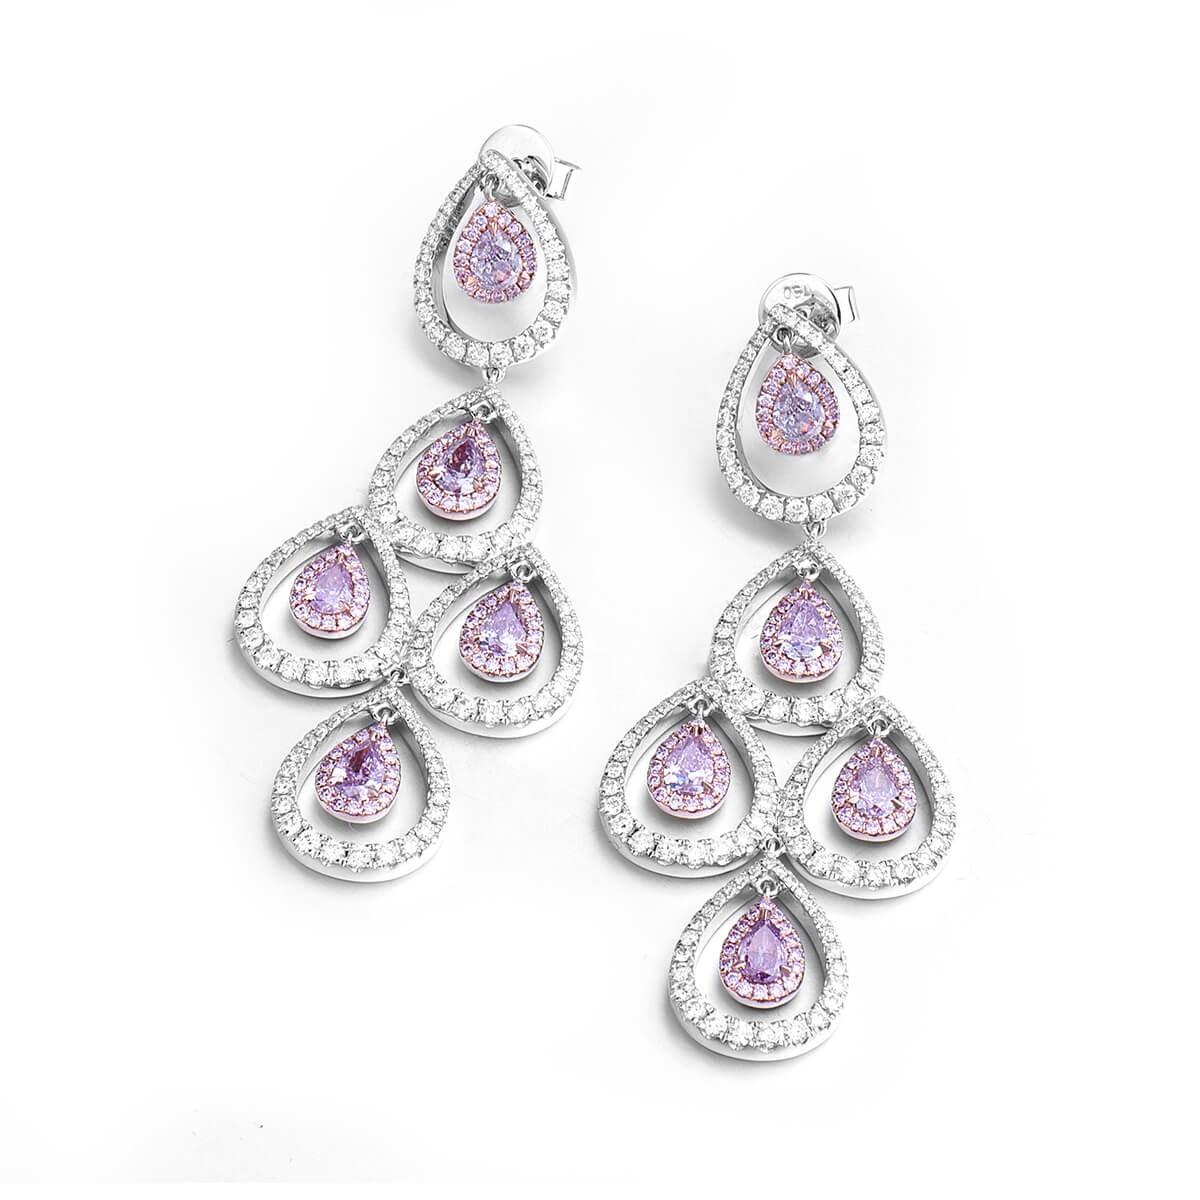 WHITE GOLD CHANDELIER PEAR CUT DIAMOND EARRINGS - 3.92 CT


Set in 18K White Gold


Total fancy pink diamond weight: 1.74 ct
[ 10 diamonds ]
Color: Pink-purple, light purplish pink, light pink, brownish pink
Clarity: VS2- I1

Total small fancy pink